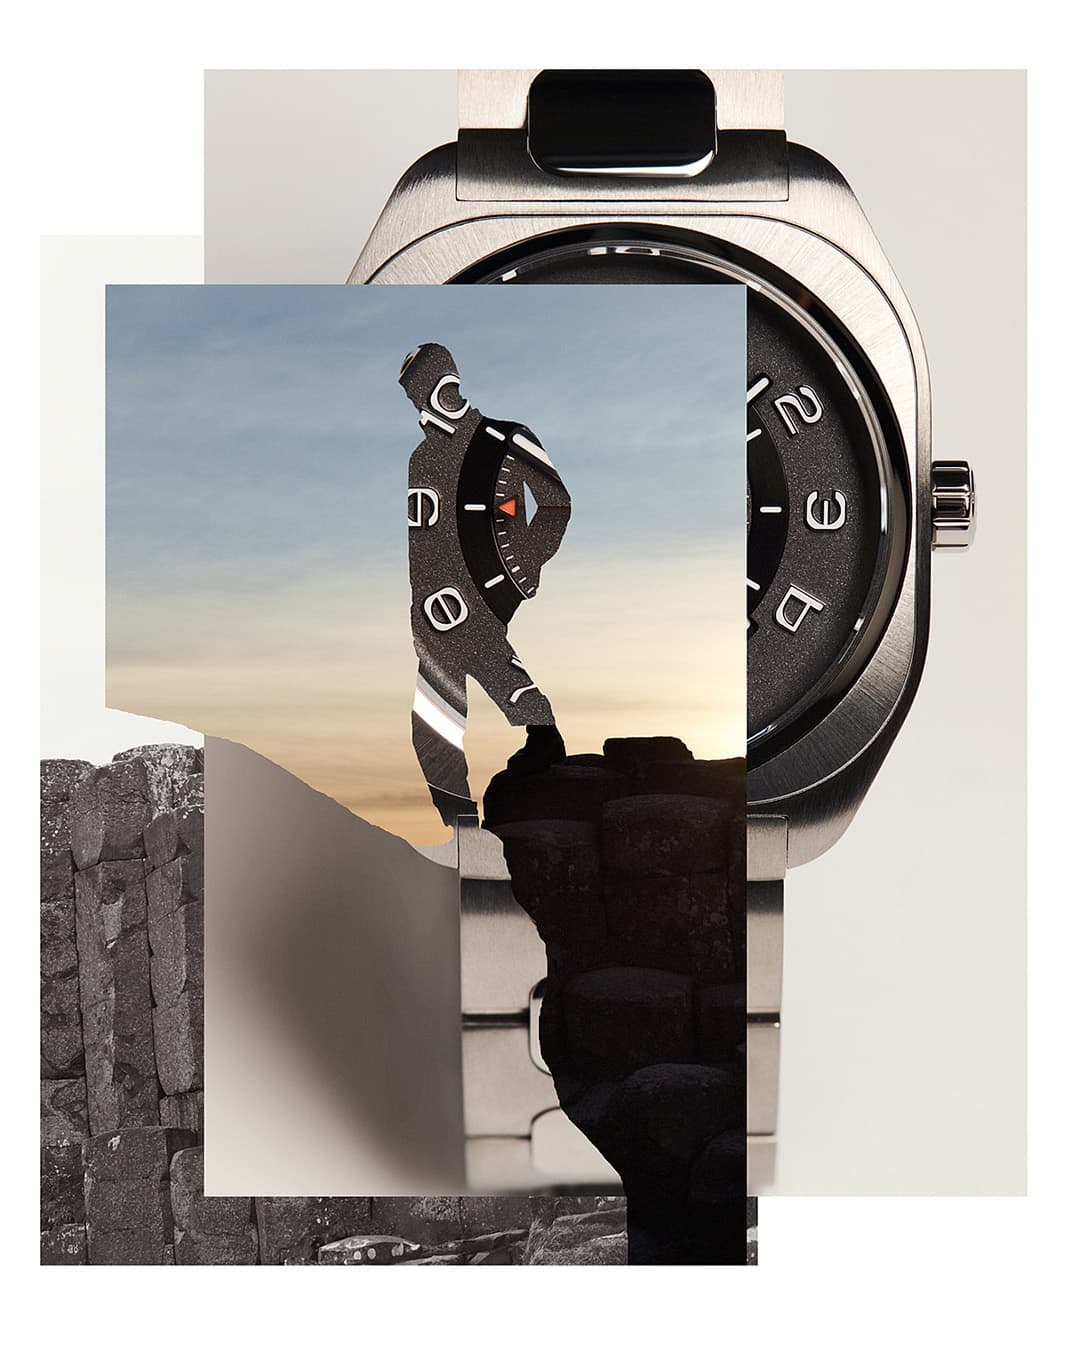 Hermès H08 Watch ‘The Texture of Time’ 2021 Ad Campaign